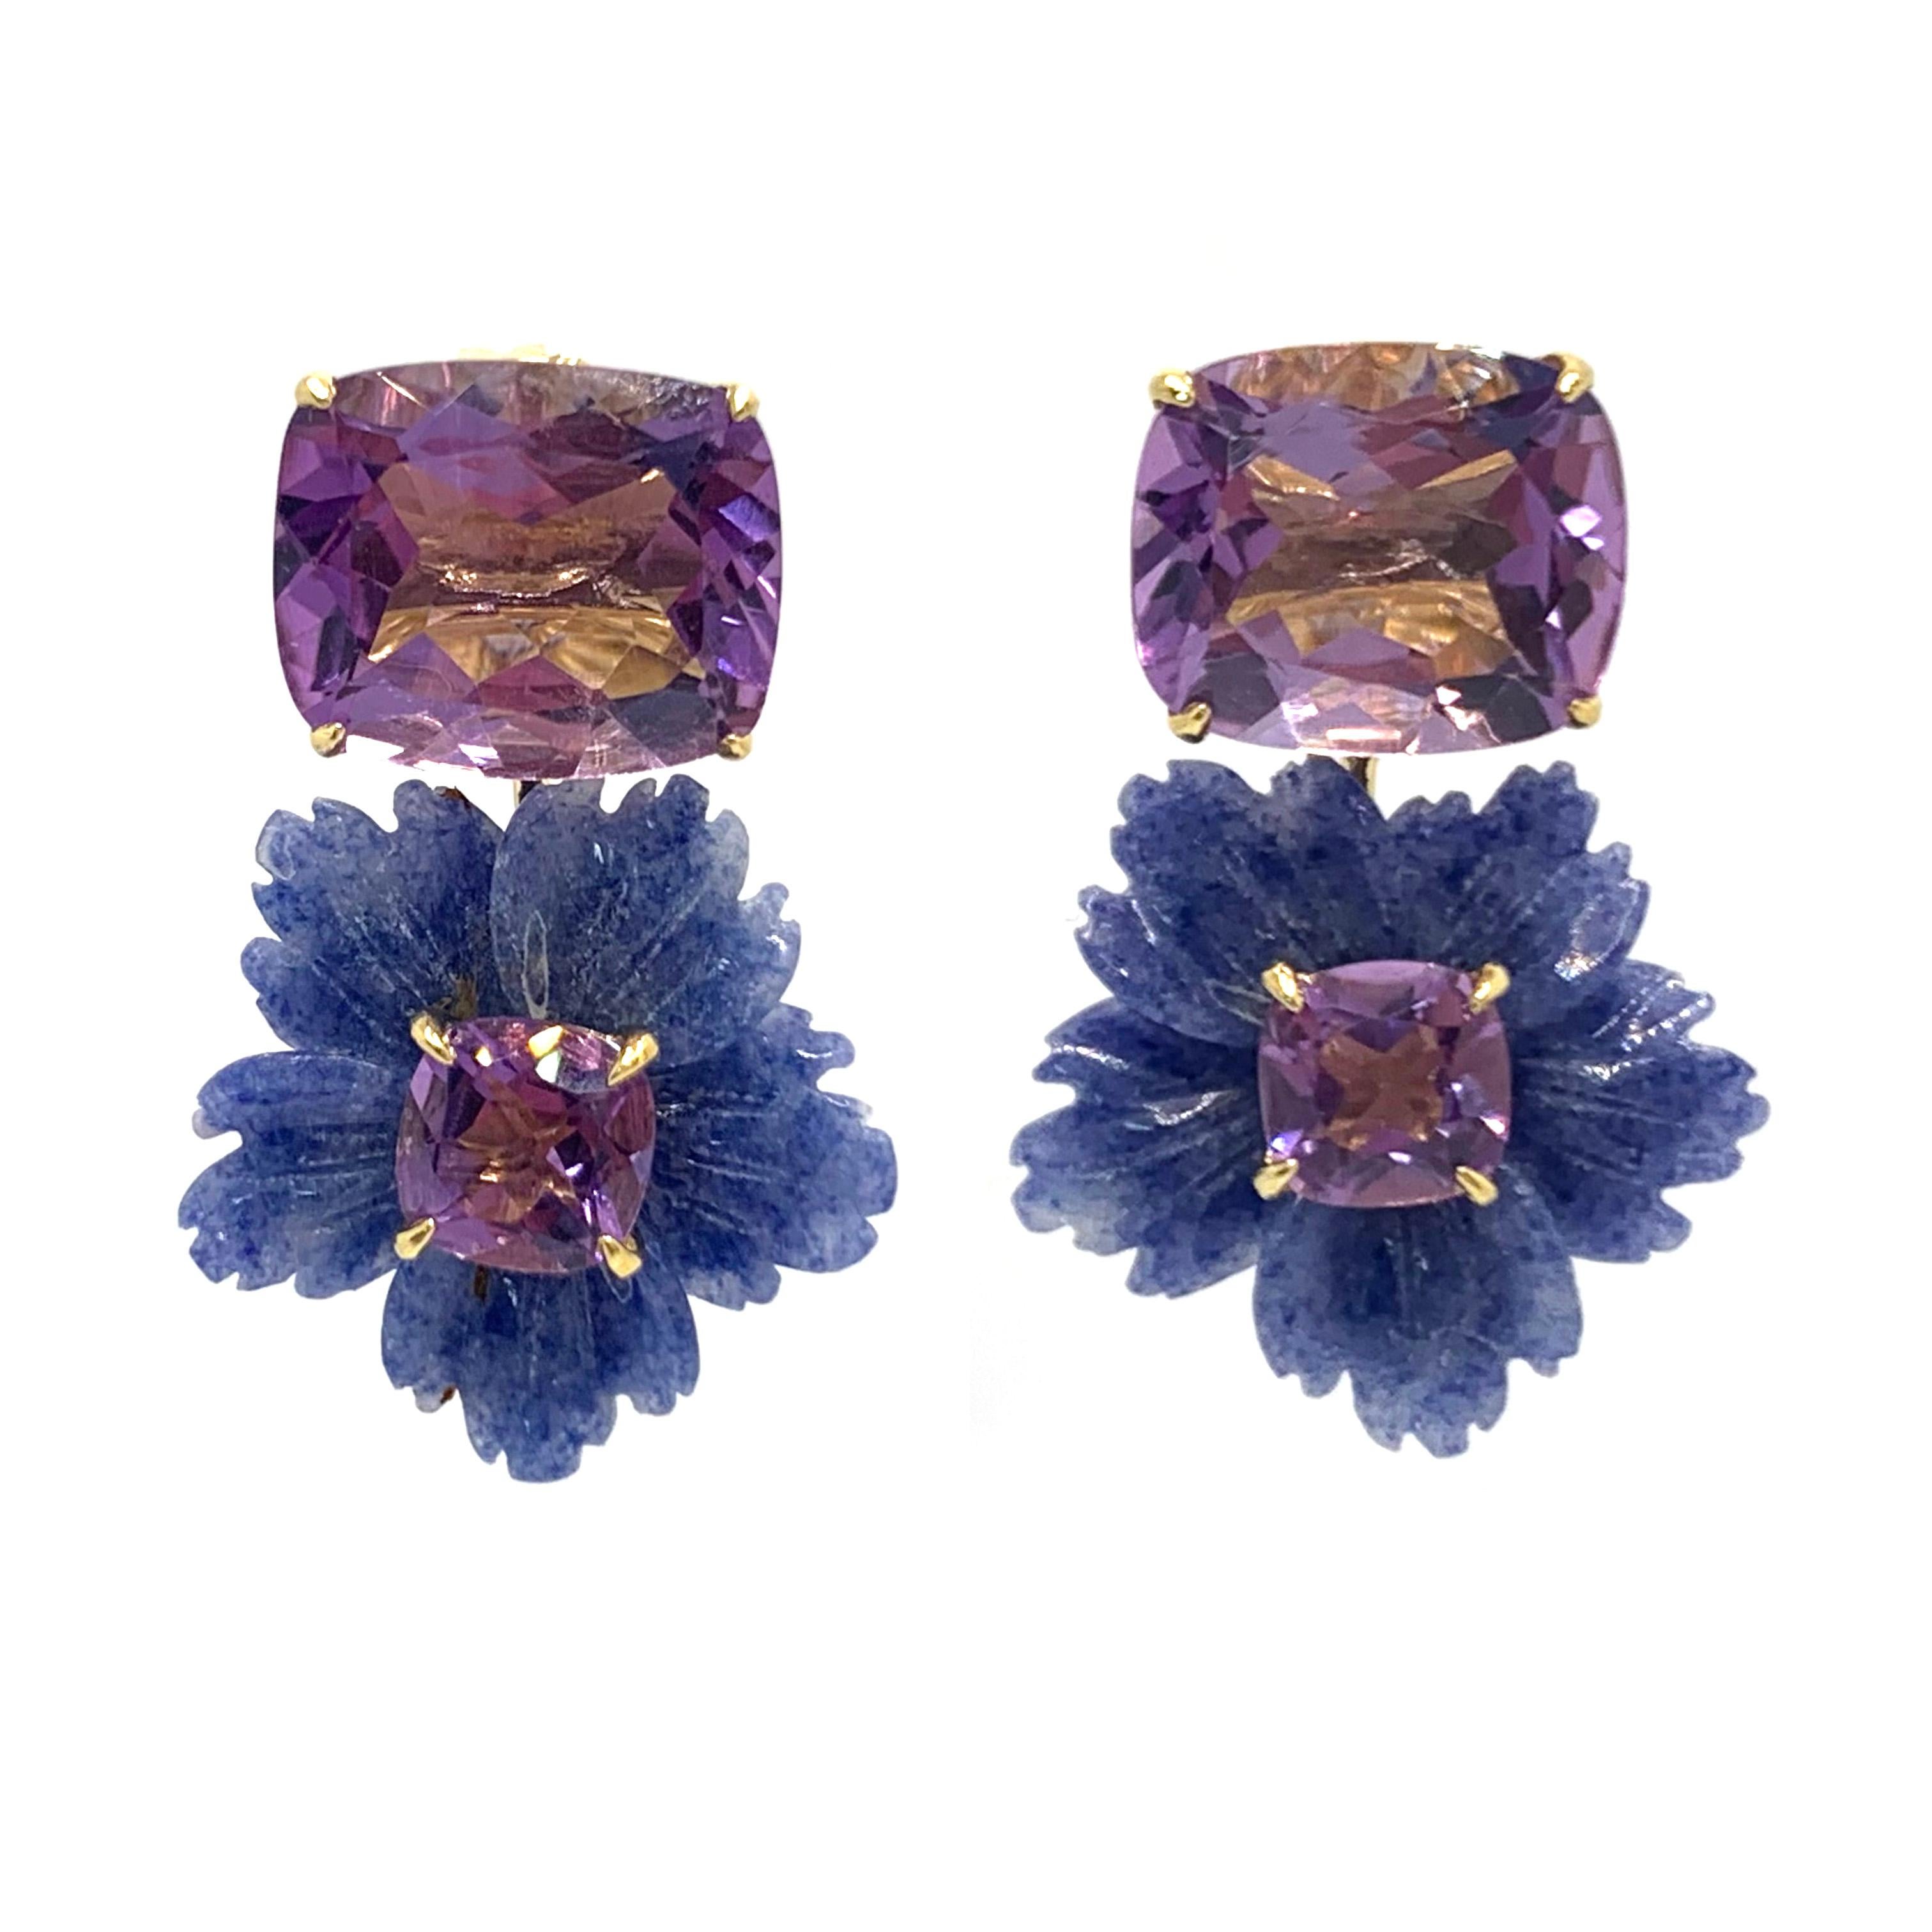 Bijoux Num's Cushion-cut Amethyst and Carved Blue Dumortierite Flower Drop Earrings

This gorgeous pair of earrings features beautiful cushion-cut Brazilian Amethyst,  18mm denim-blue dumortierite carved into beautiful three dimension flower with